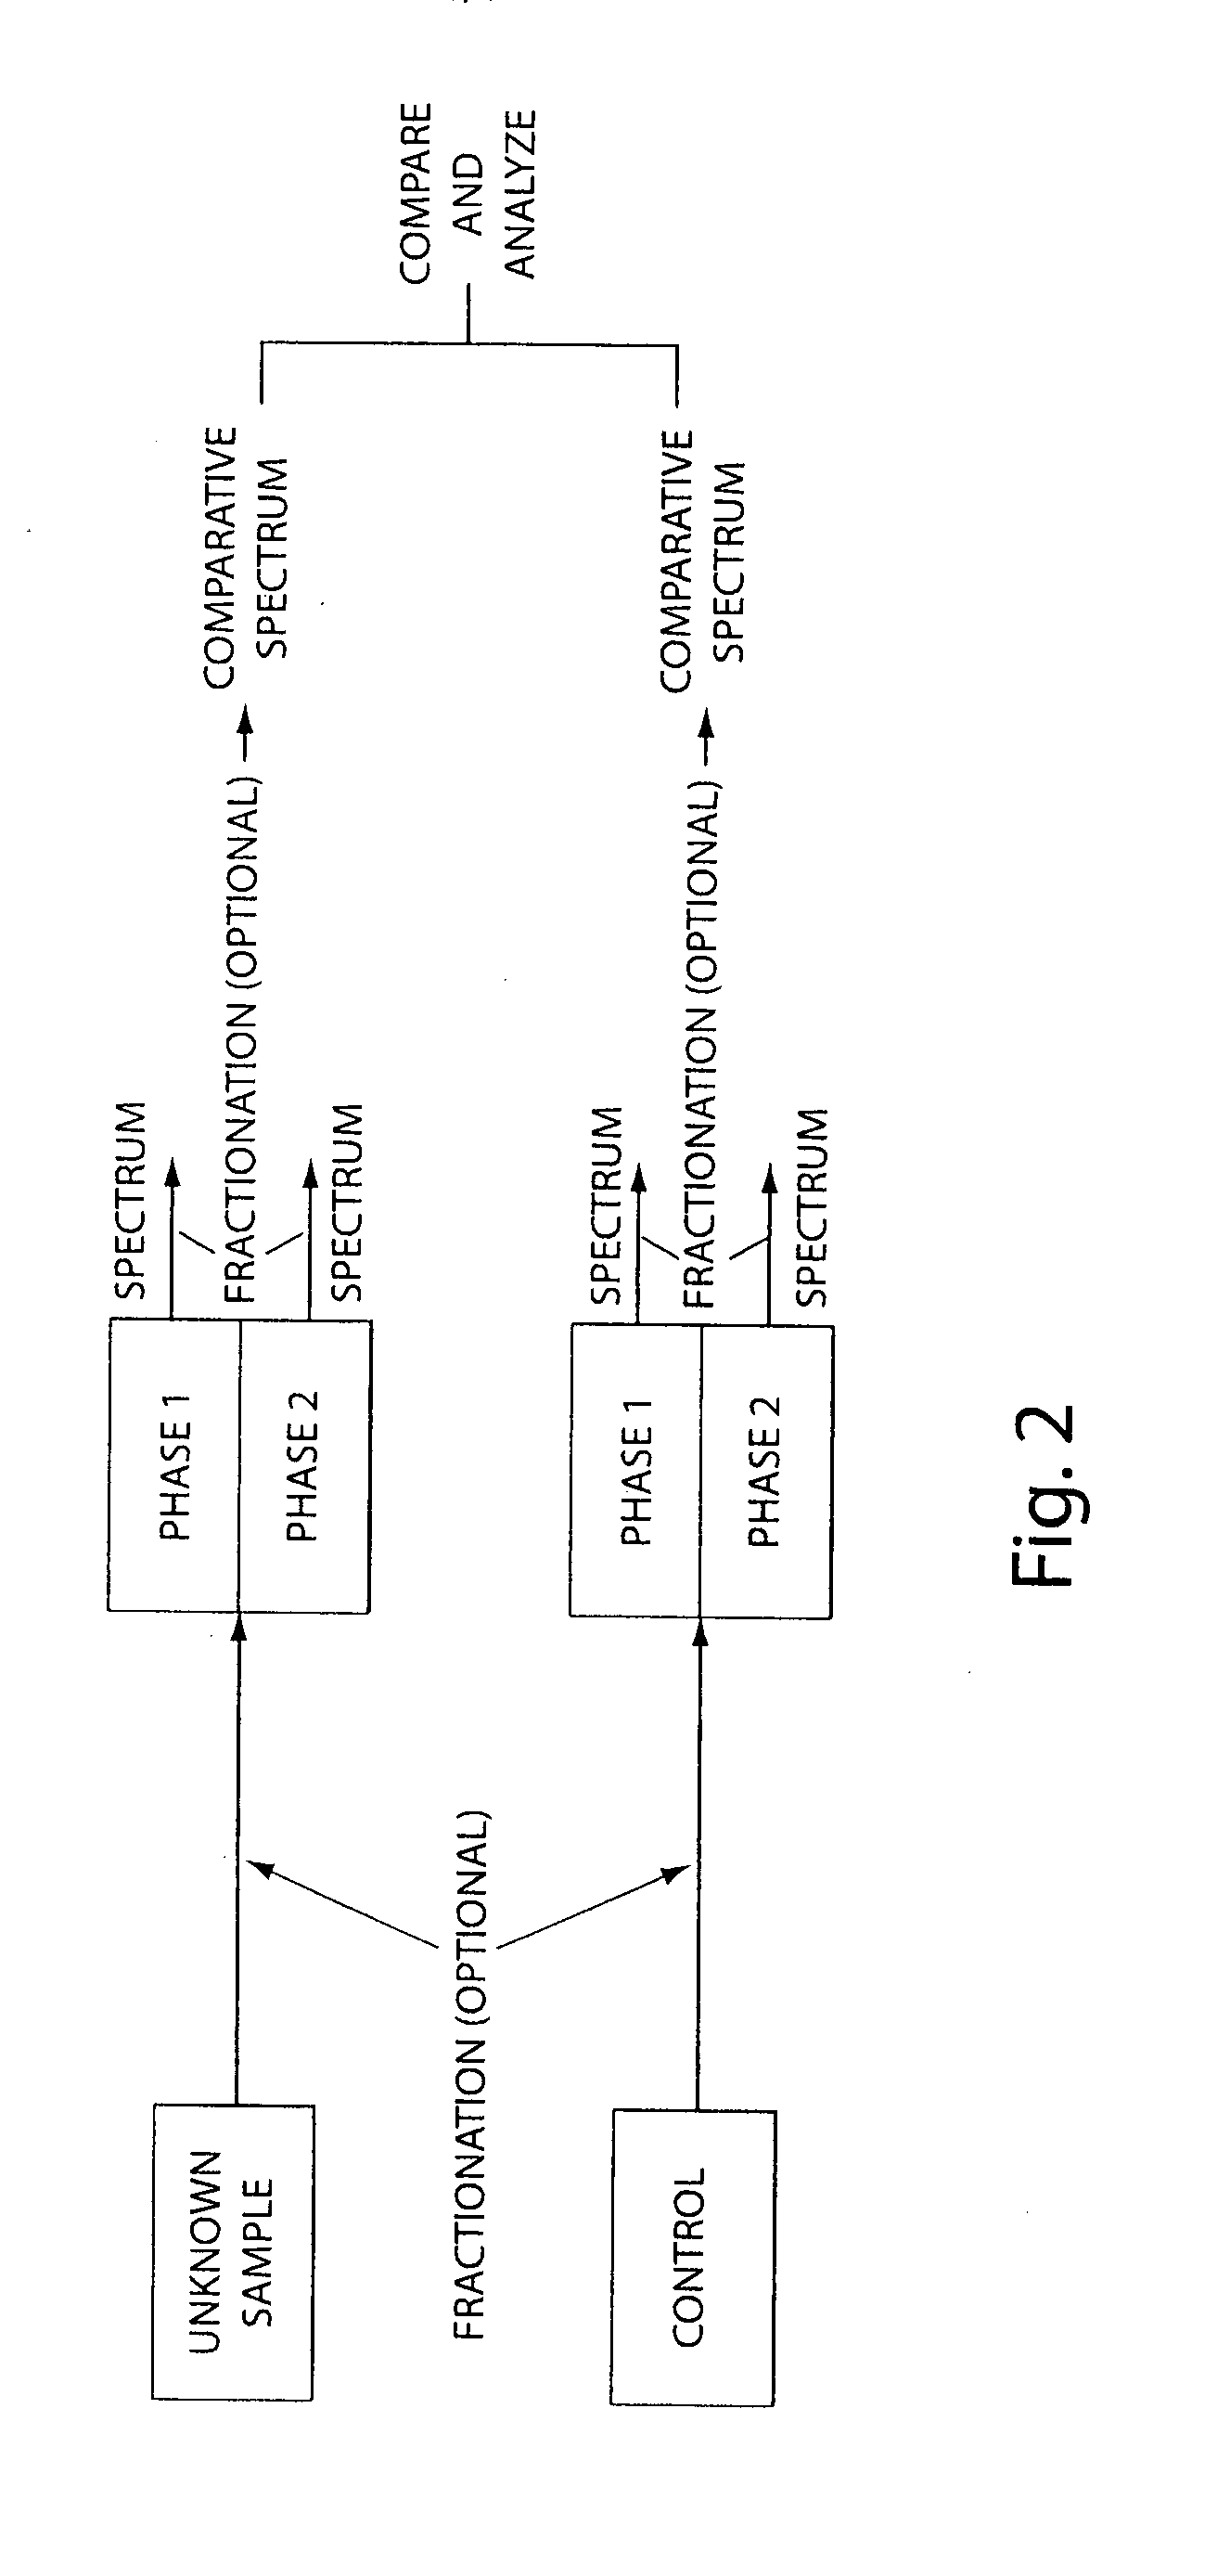 Systems and methods involving data patterns such as spectral biomarkers